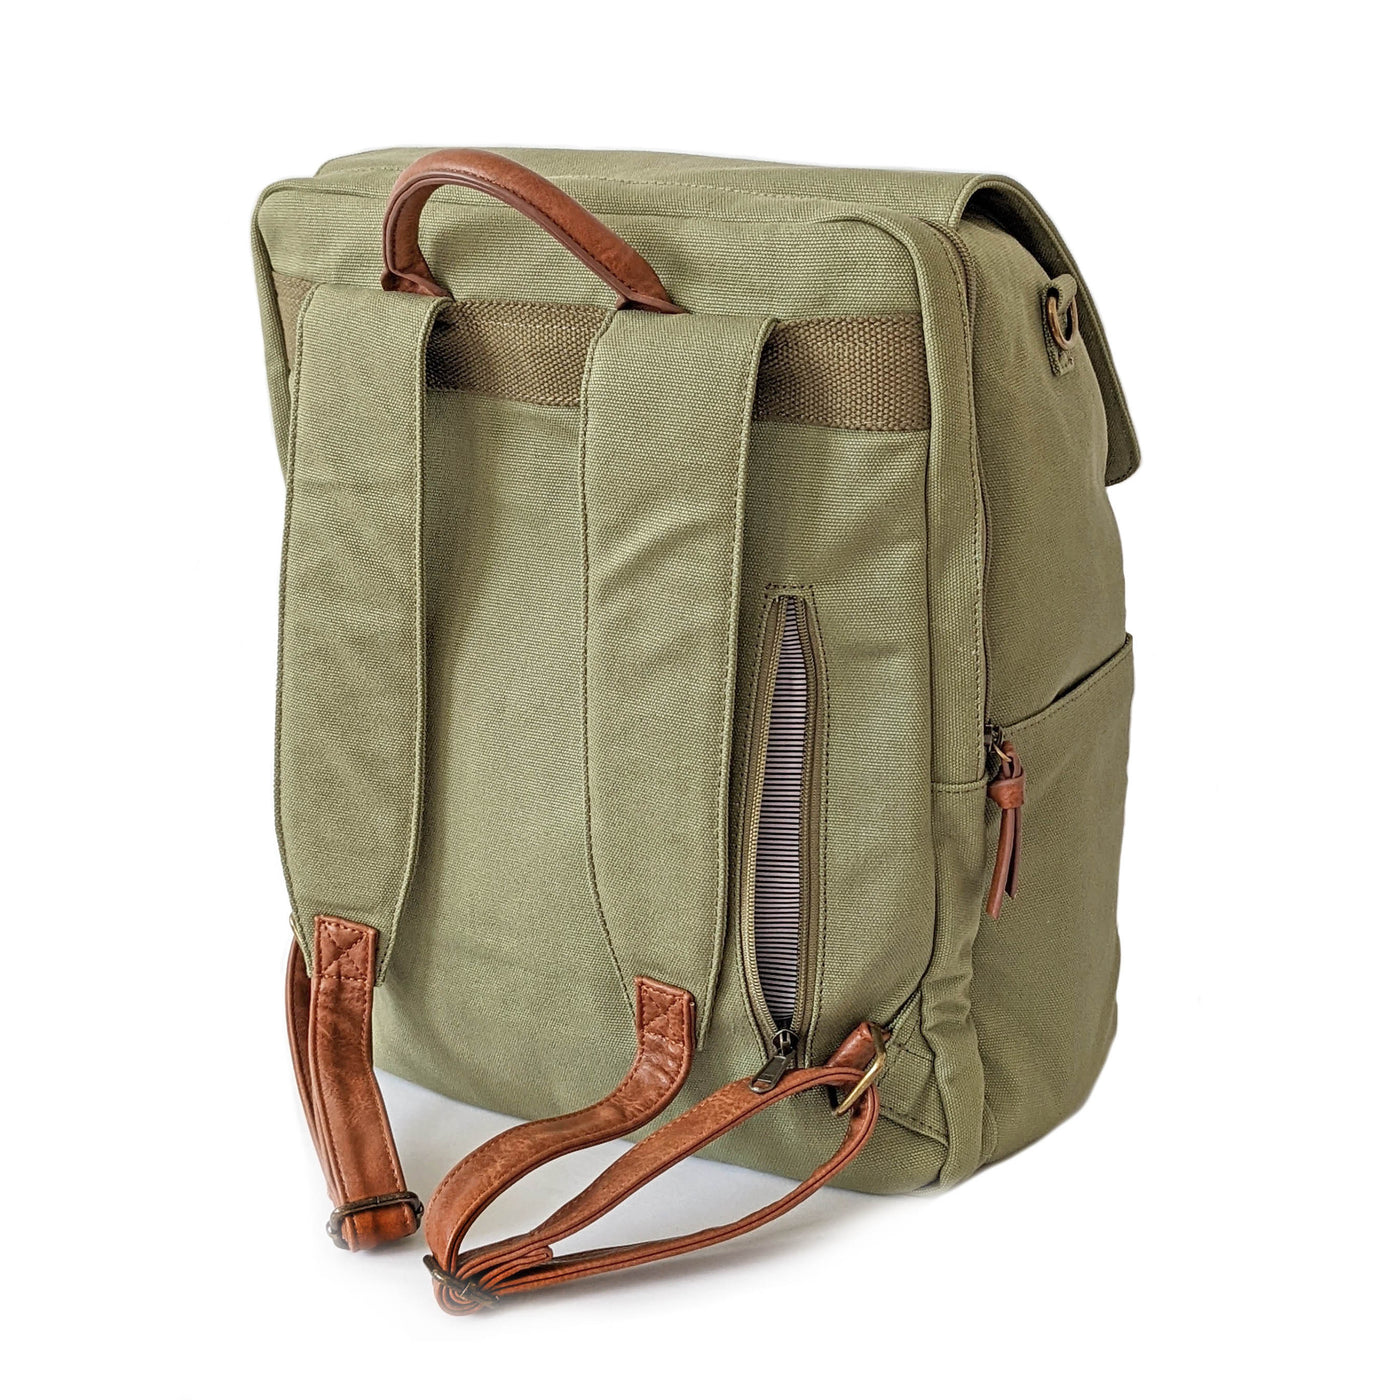 A laurel green colored canvas backpack diaper bag with caramel brown vegan leather accents, shown in a 3/4 rear view on a white background.